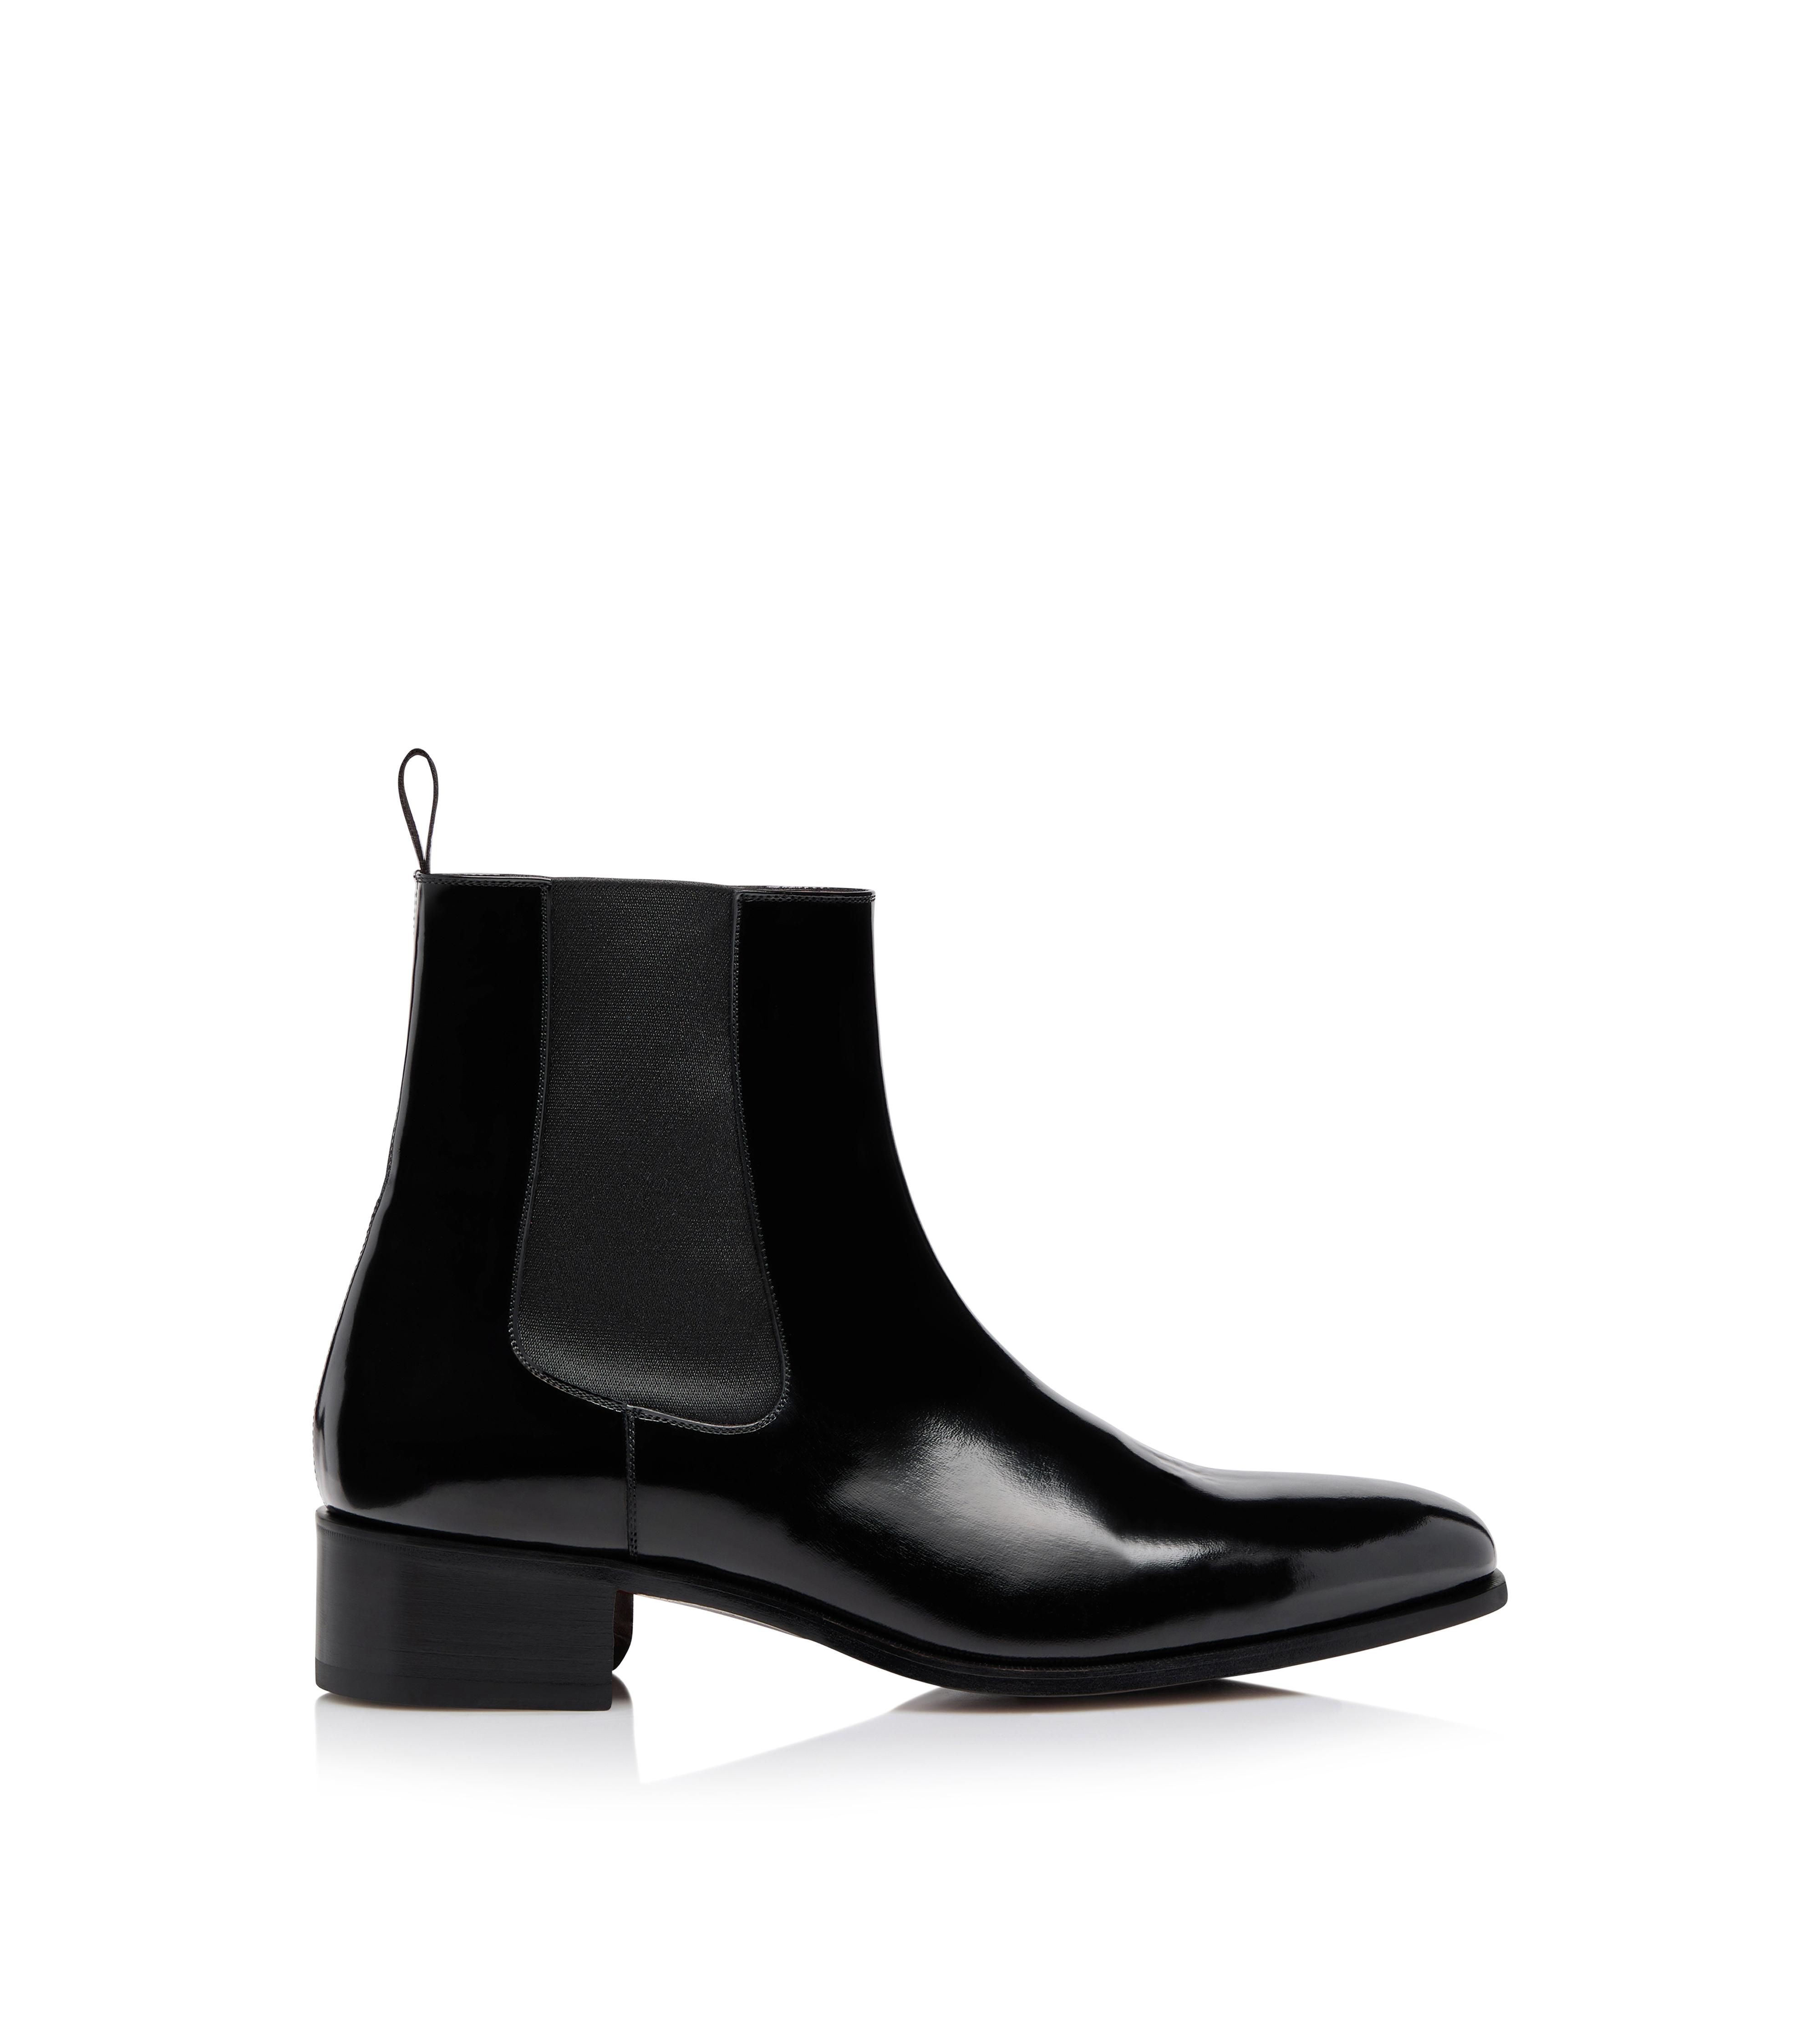 Boots - Men's Boots | TomFord.co.uk